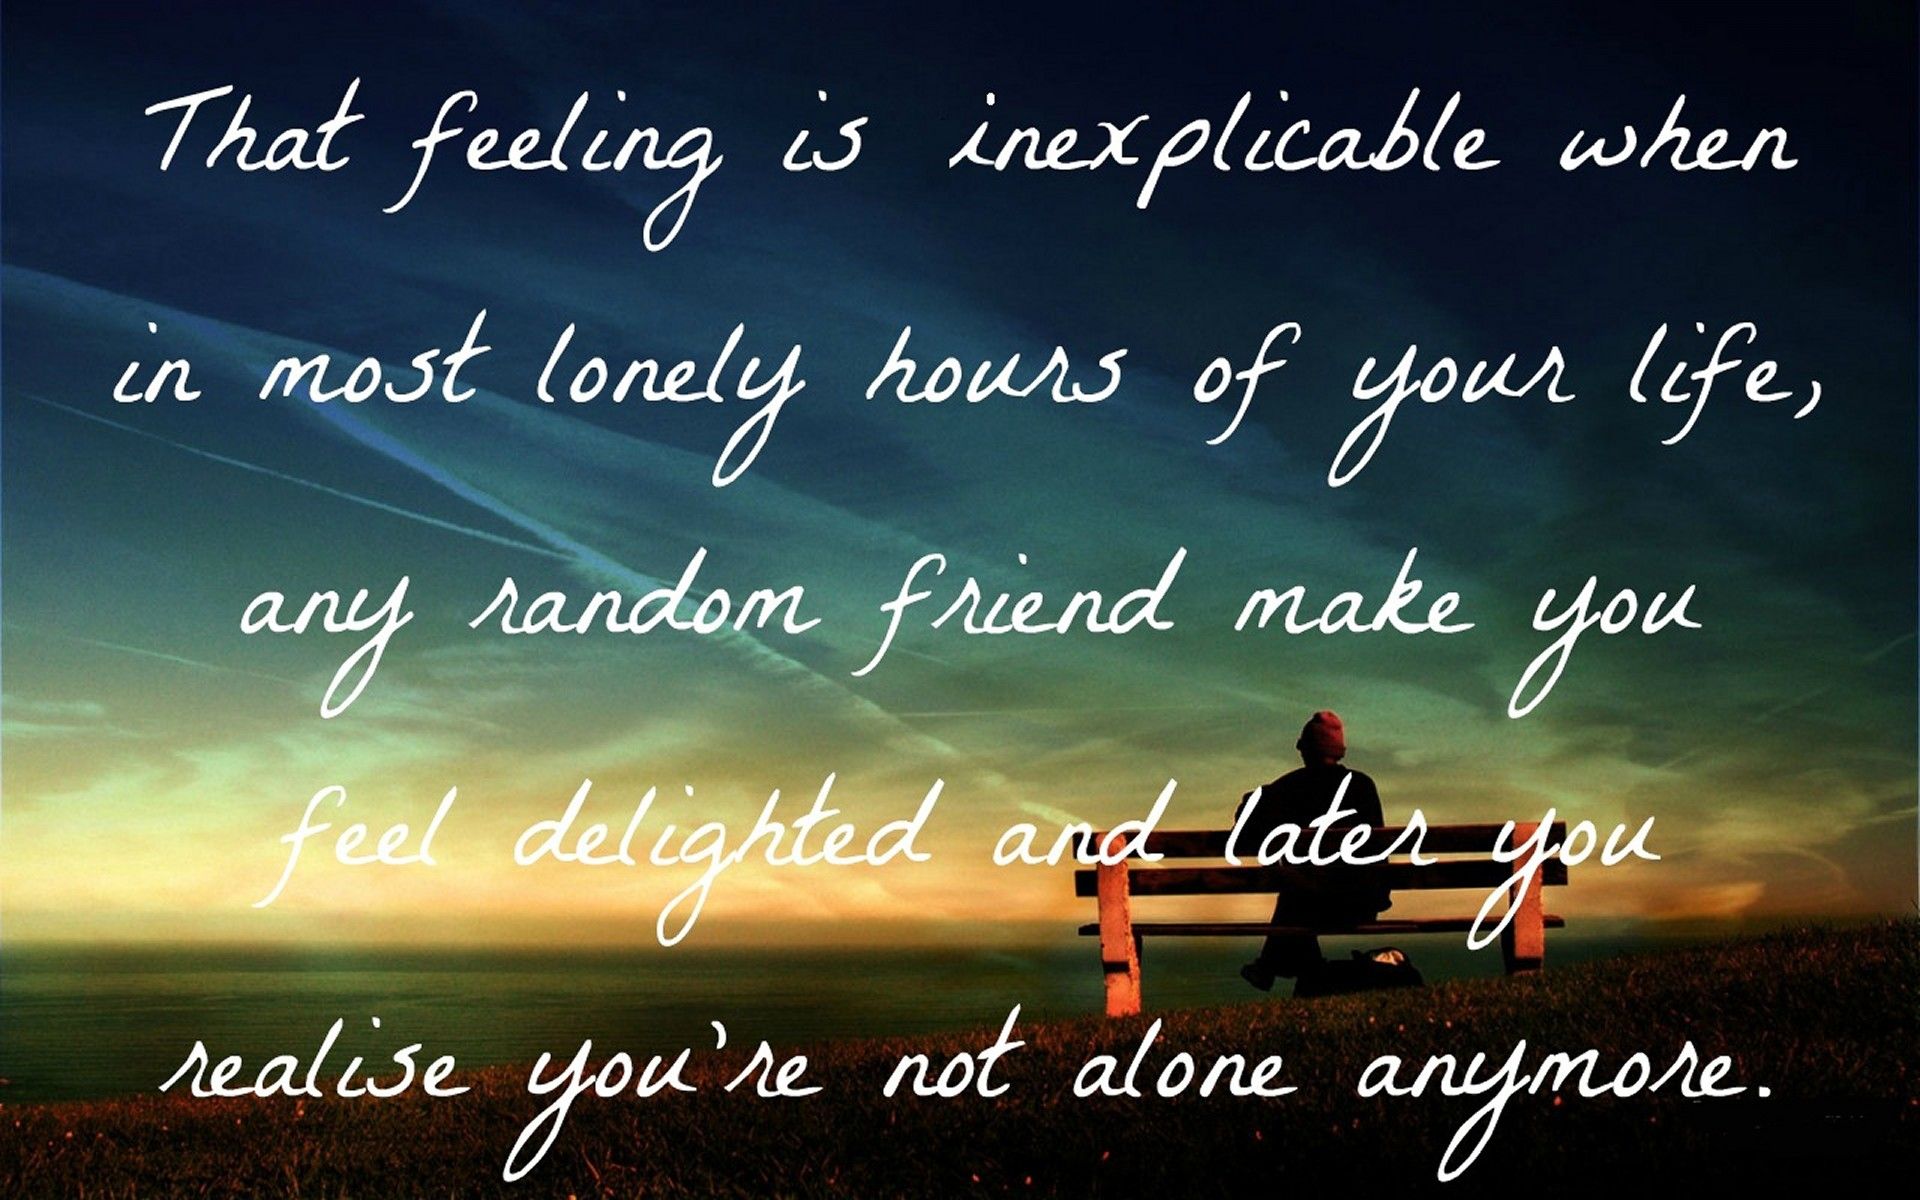 Loneliness Quotes HD Wallpapers Images AtozWallpaper